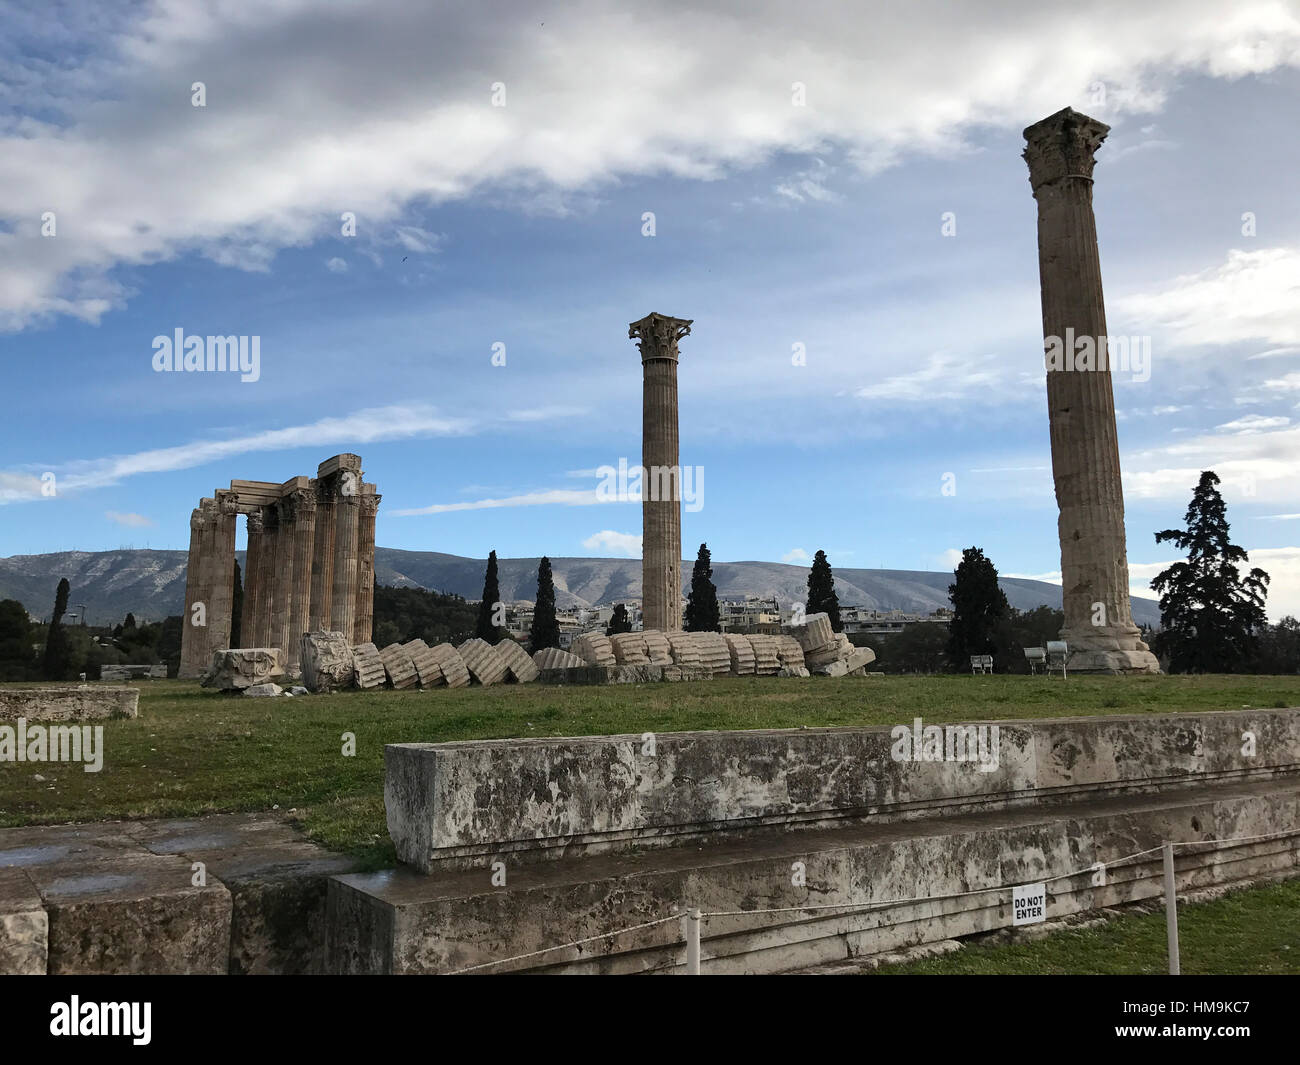 The Temple of Olympian Zeus in Athens, Greece Stock Photo